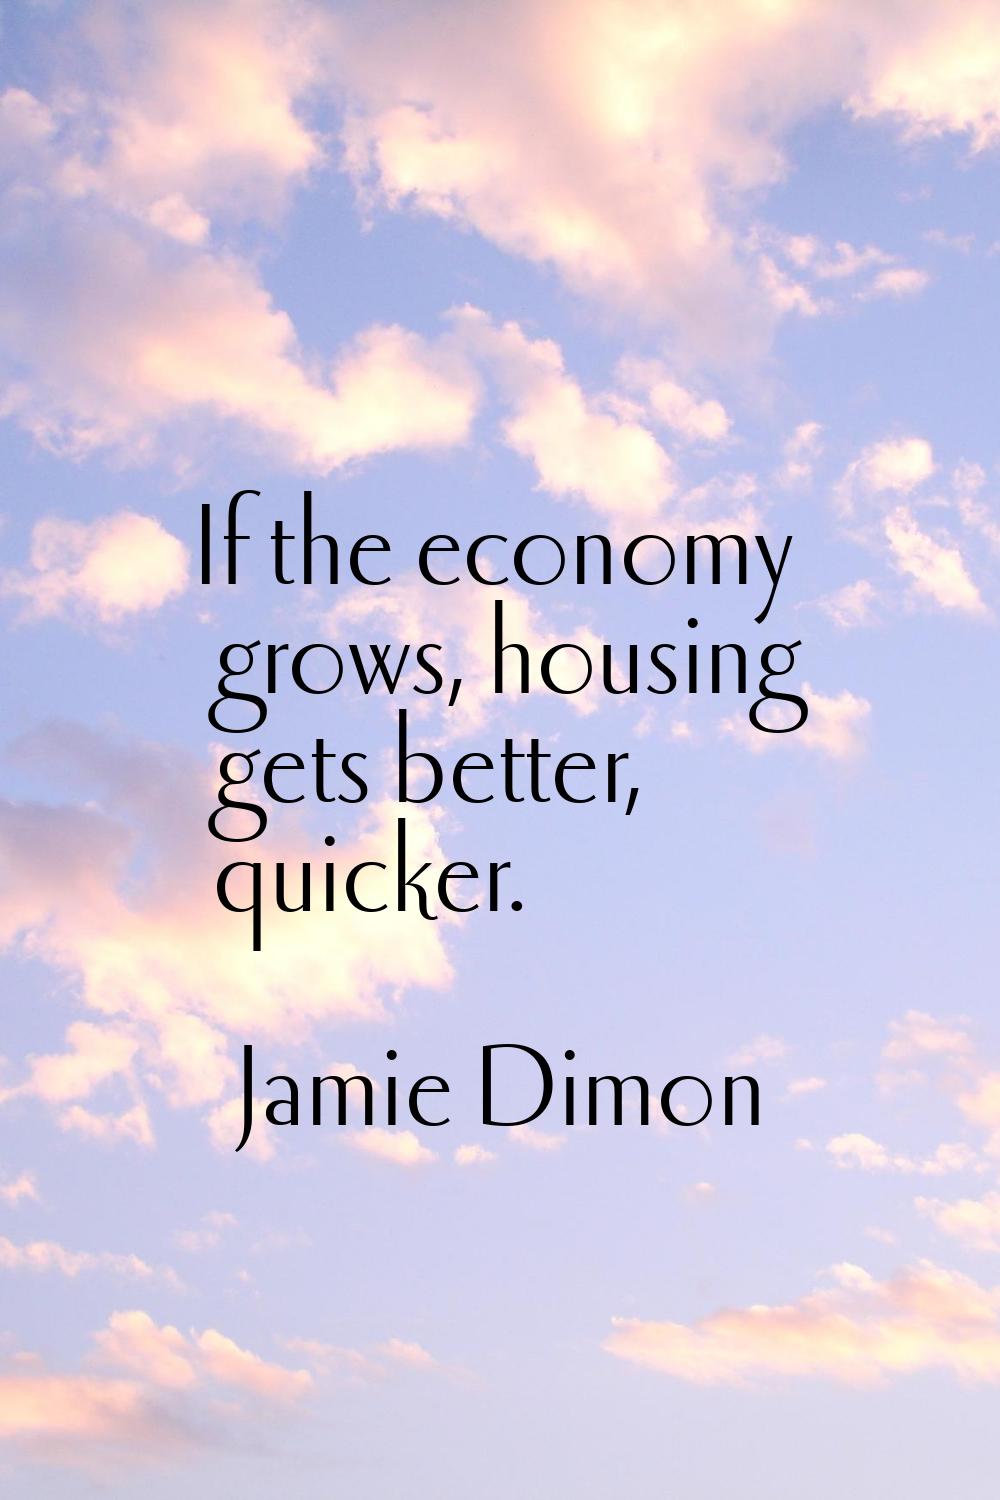 If the economy grows, housing gets better, quicker.